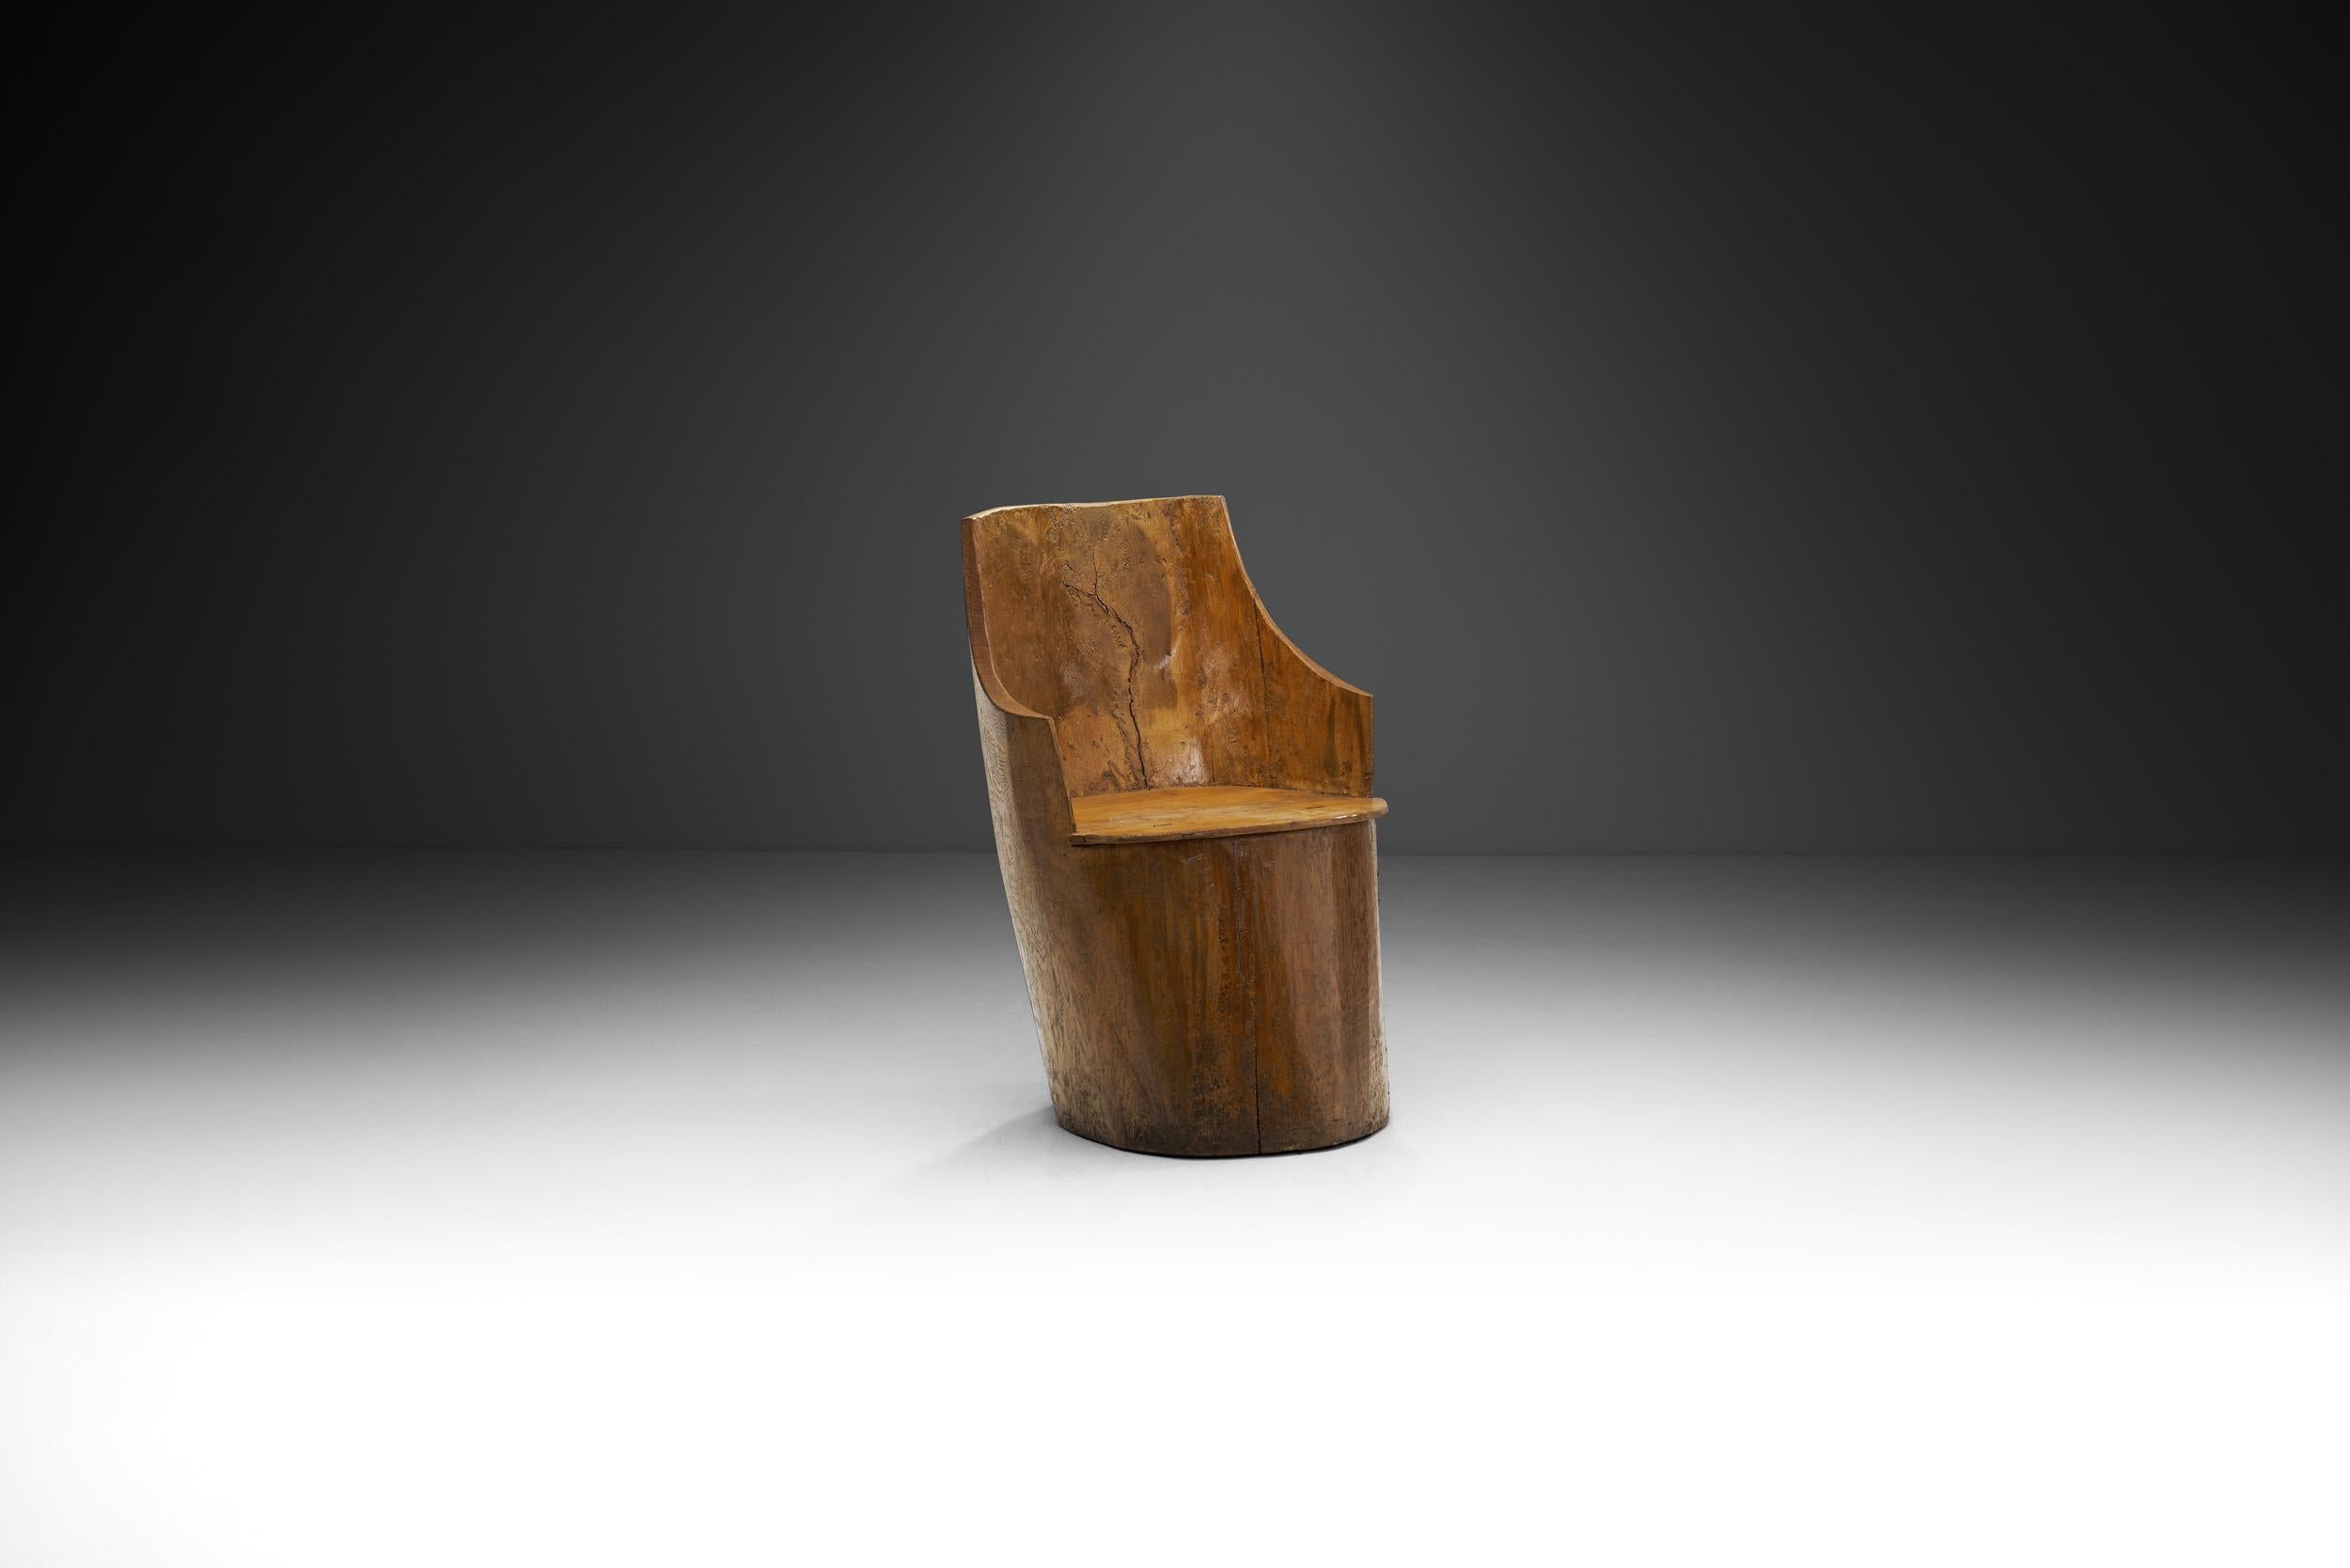 In Norway, cube chairs have been in use since the Middle Ages, and in the 18th and 19th centuries, cube chairs were mostly used in the farming communities in Eastern and Southern Norway.

Kubbestol or cube chair is traditionally carved out of a